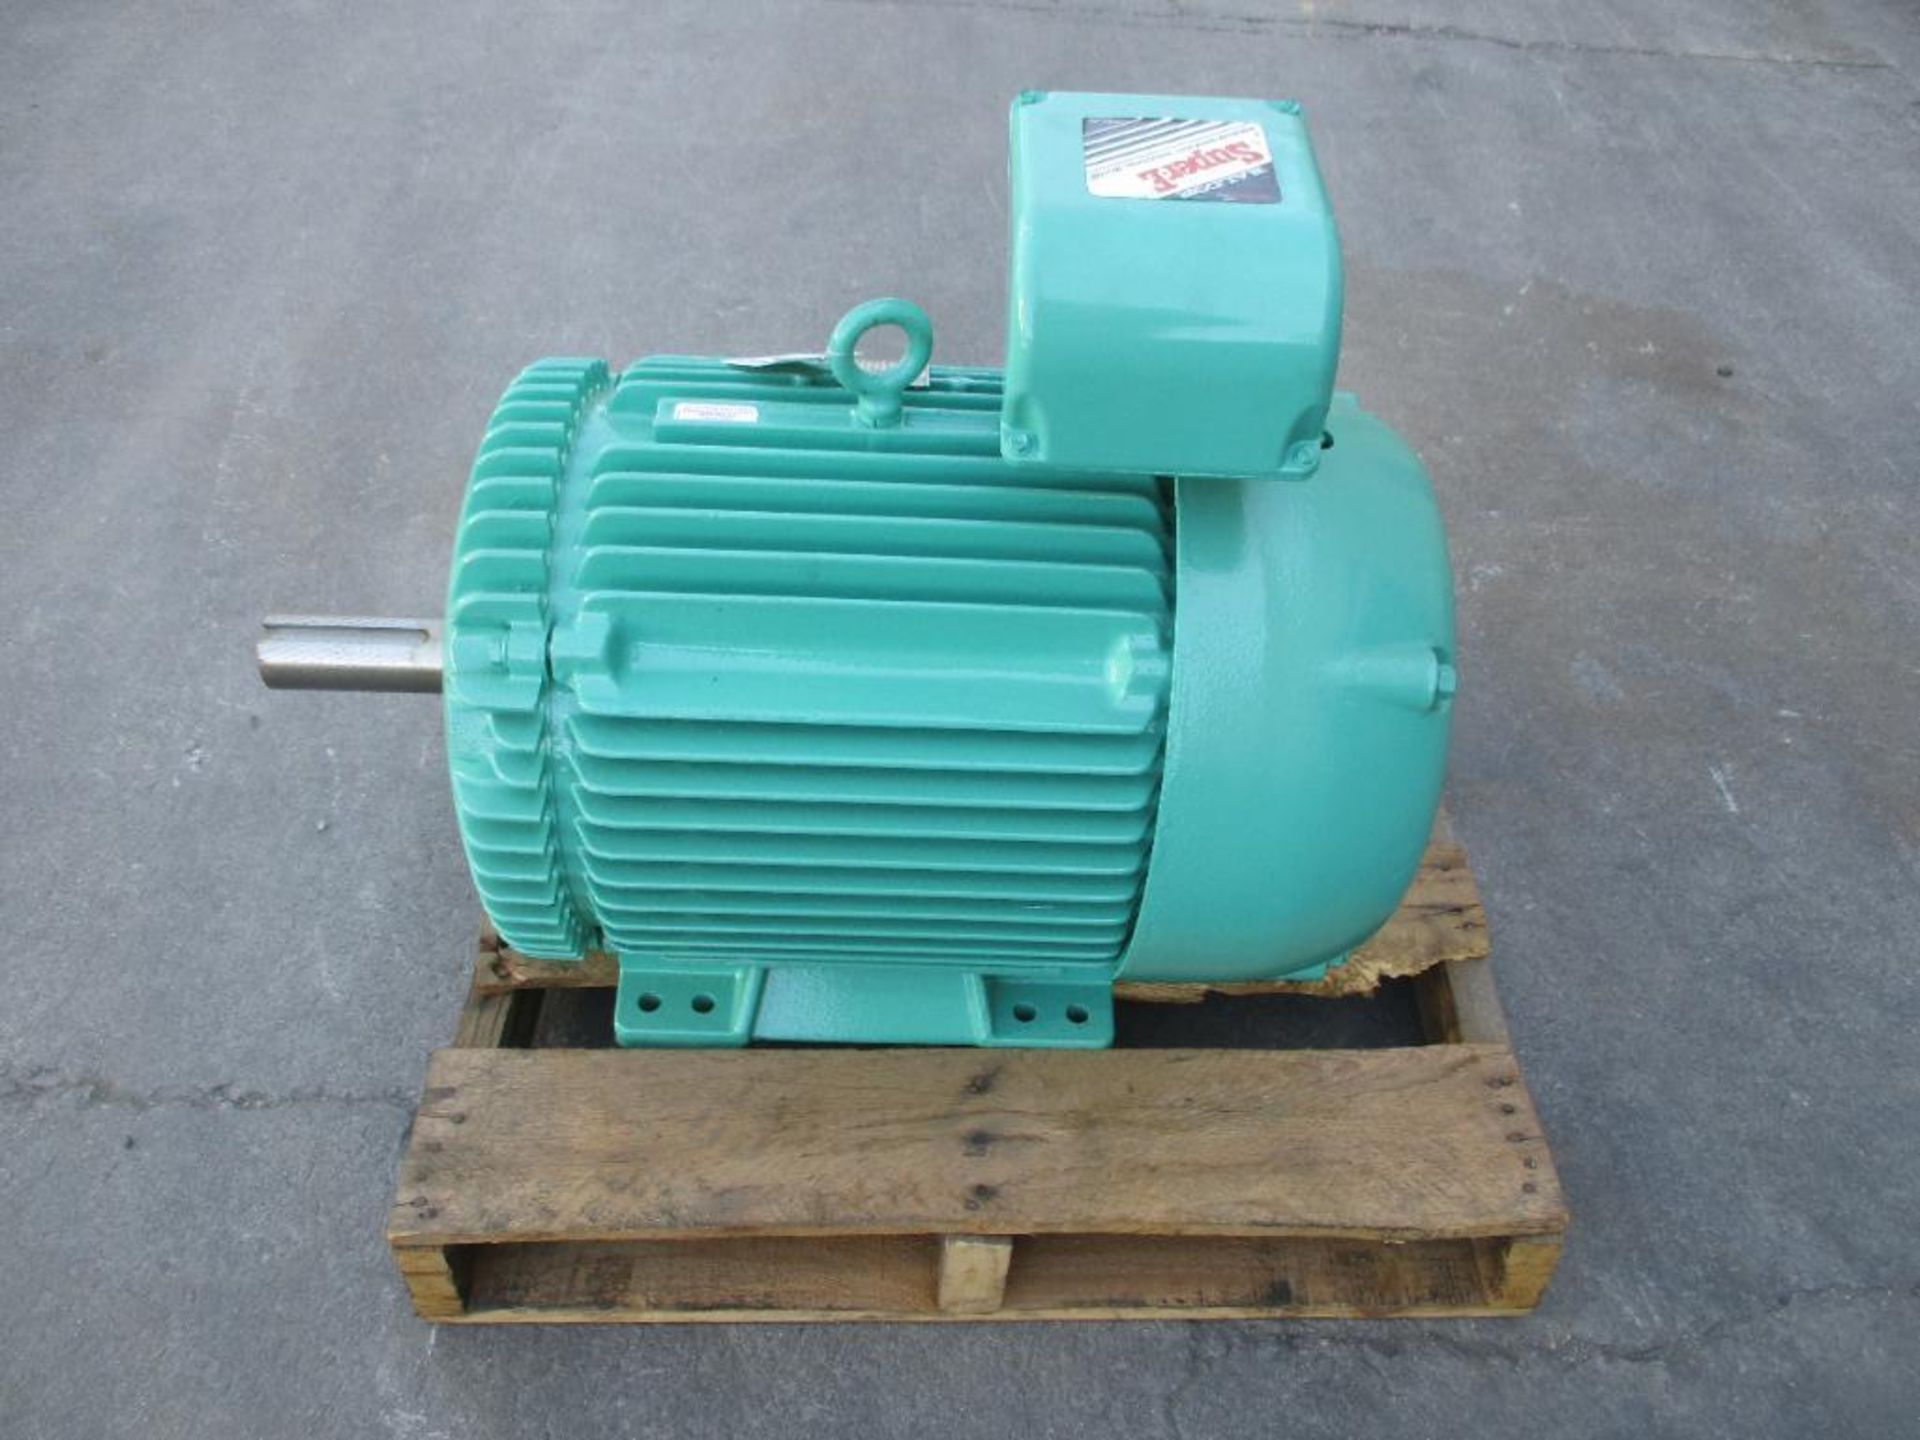 BALDOR 3 PHASE 50HP 1800RPM 326T FRAME A/C MOTOR P/N EM4115T 646# LBS (THIS LOT IS FOB KNOXVILLE TN) - Image 4 of 5